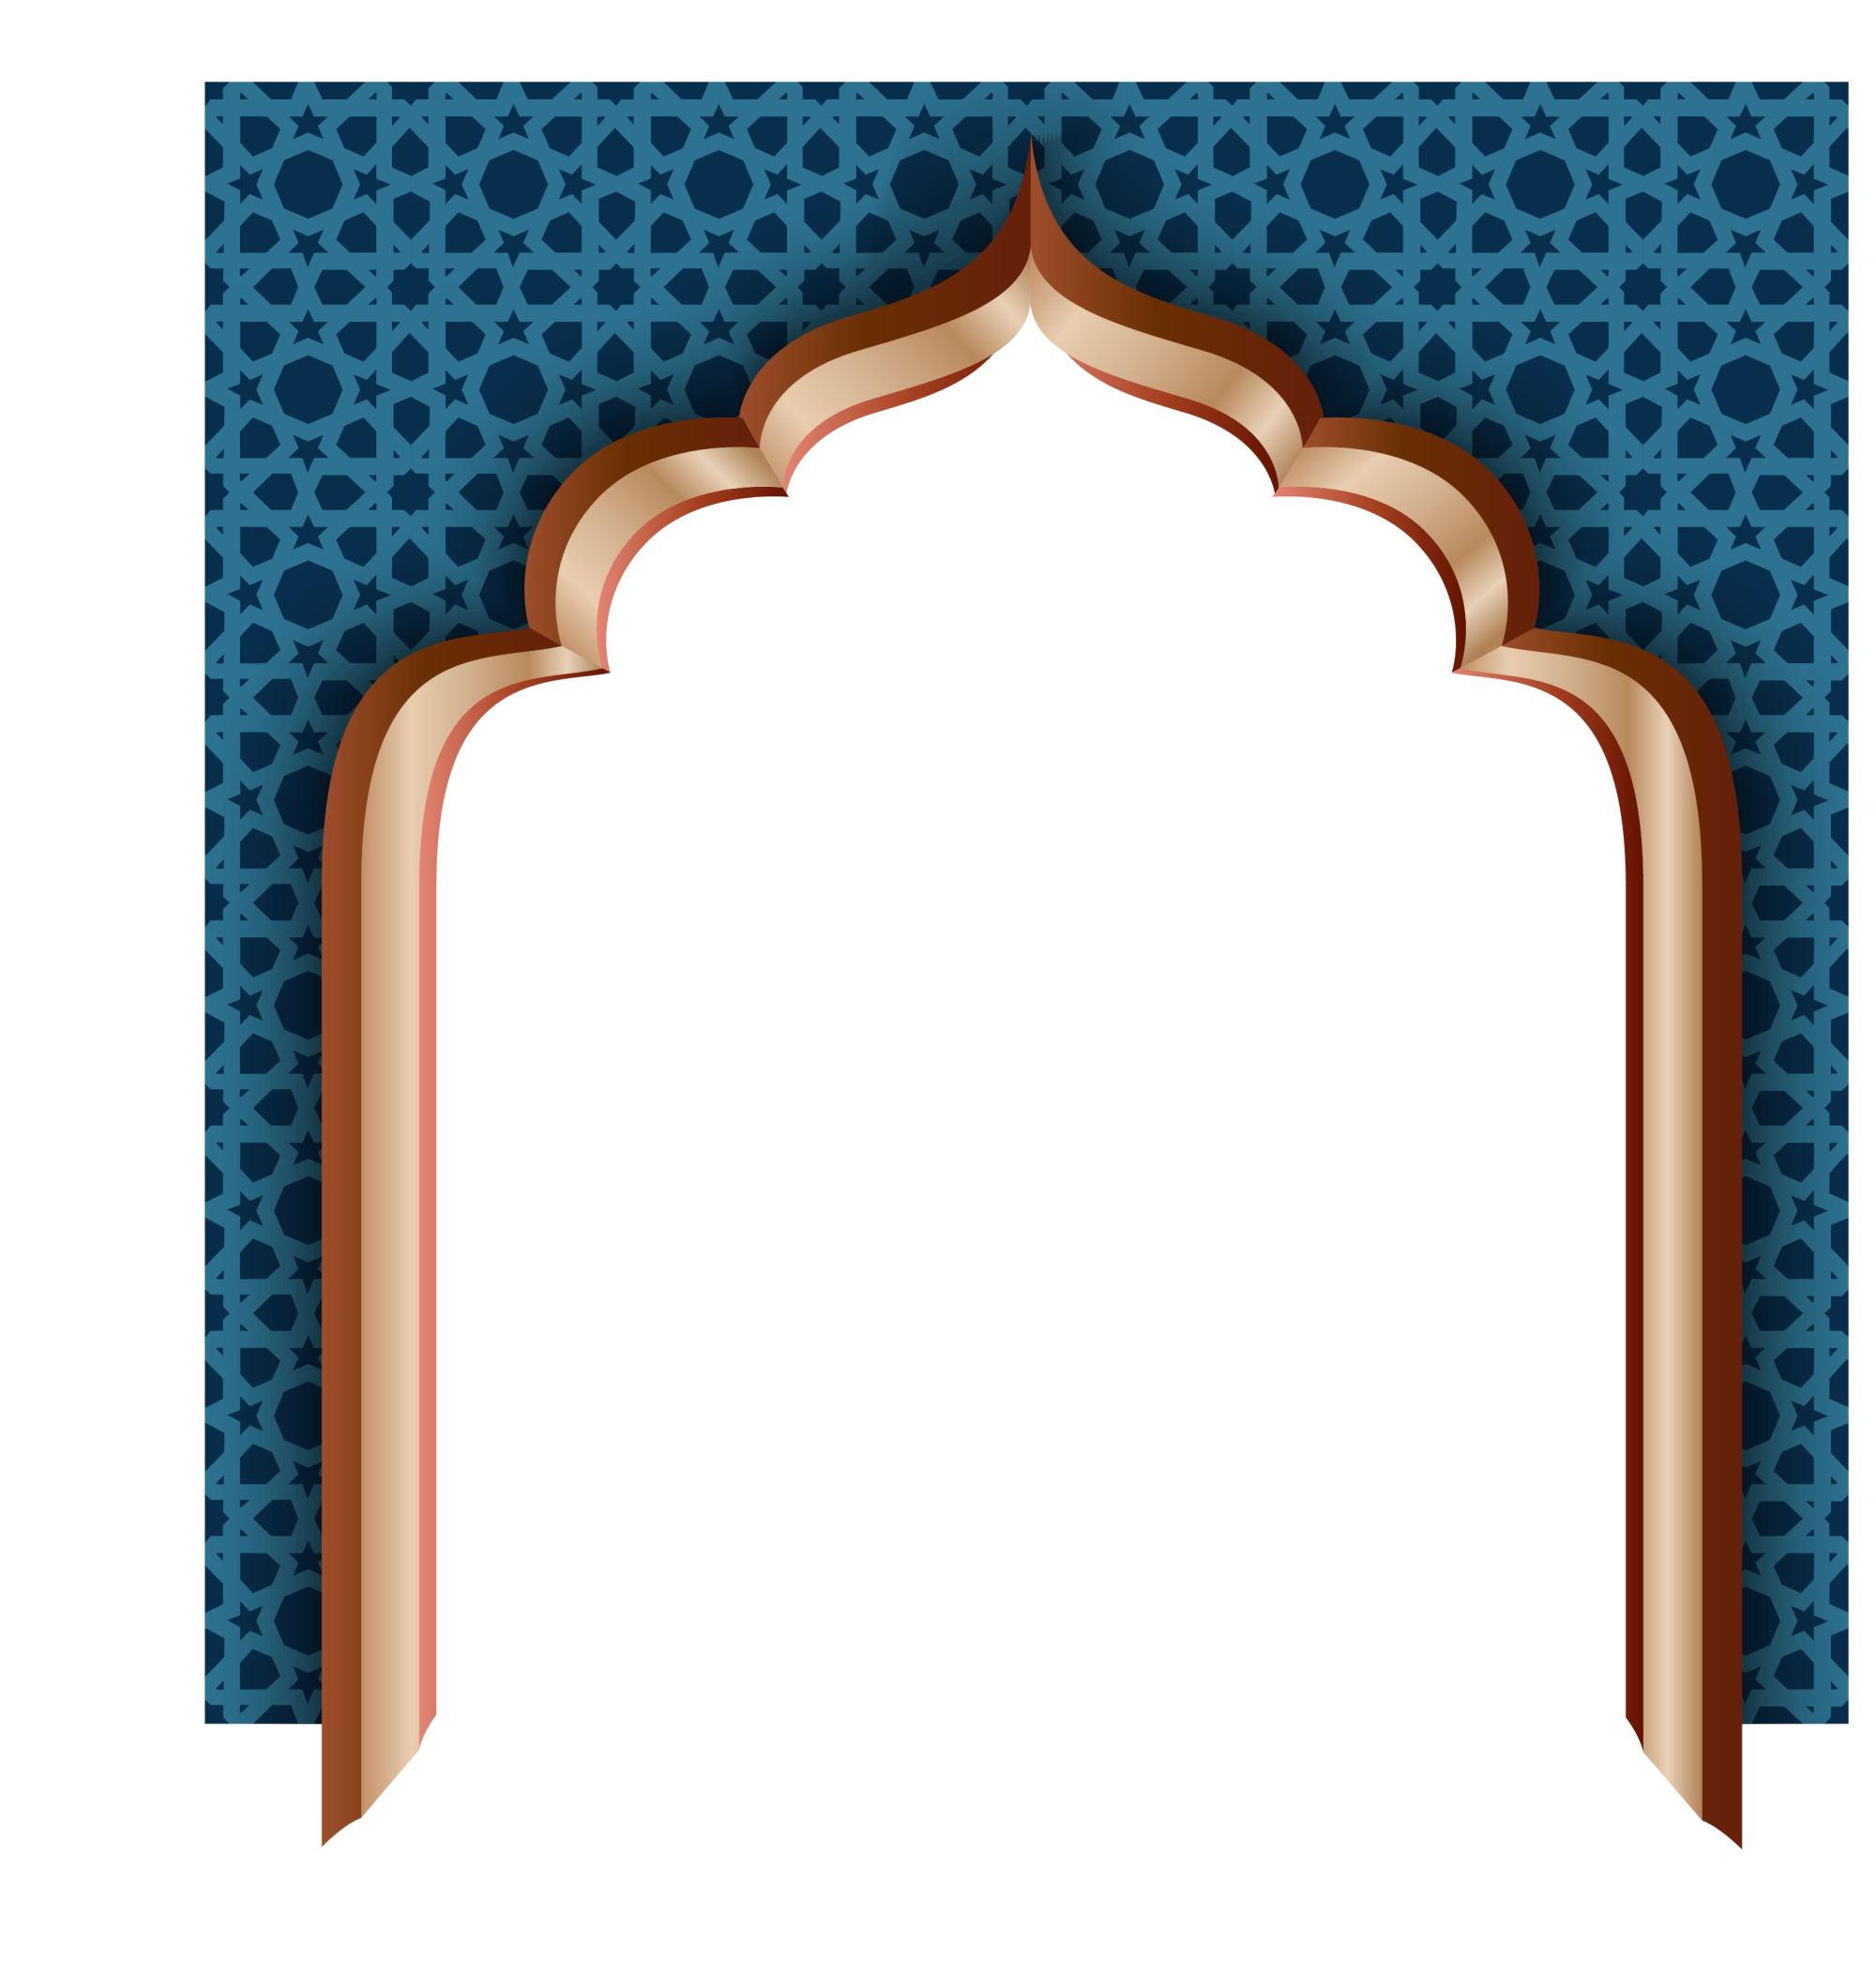 Mosque Door Png Most Mosques Have Some Problems In Common Who Will Lock And Unlock Mosque Doors And At What Time Does The Mosque Remain Open At All Times Or Only